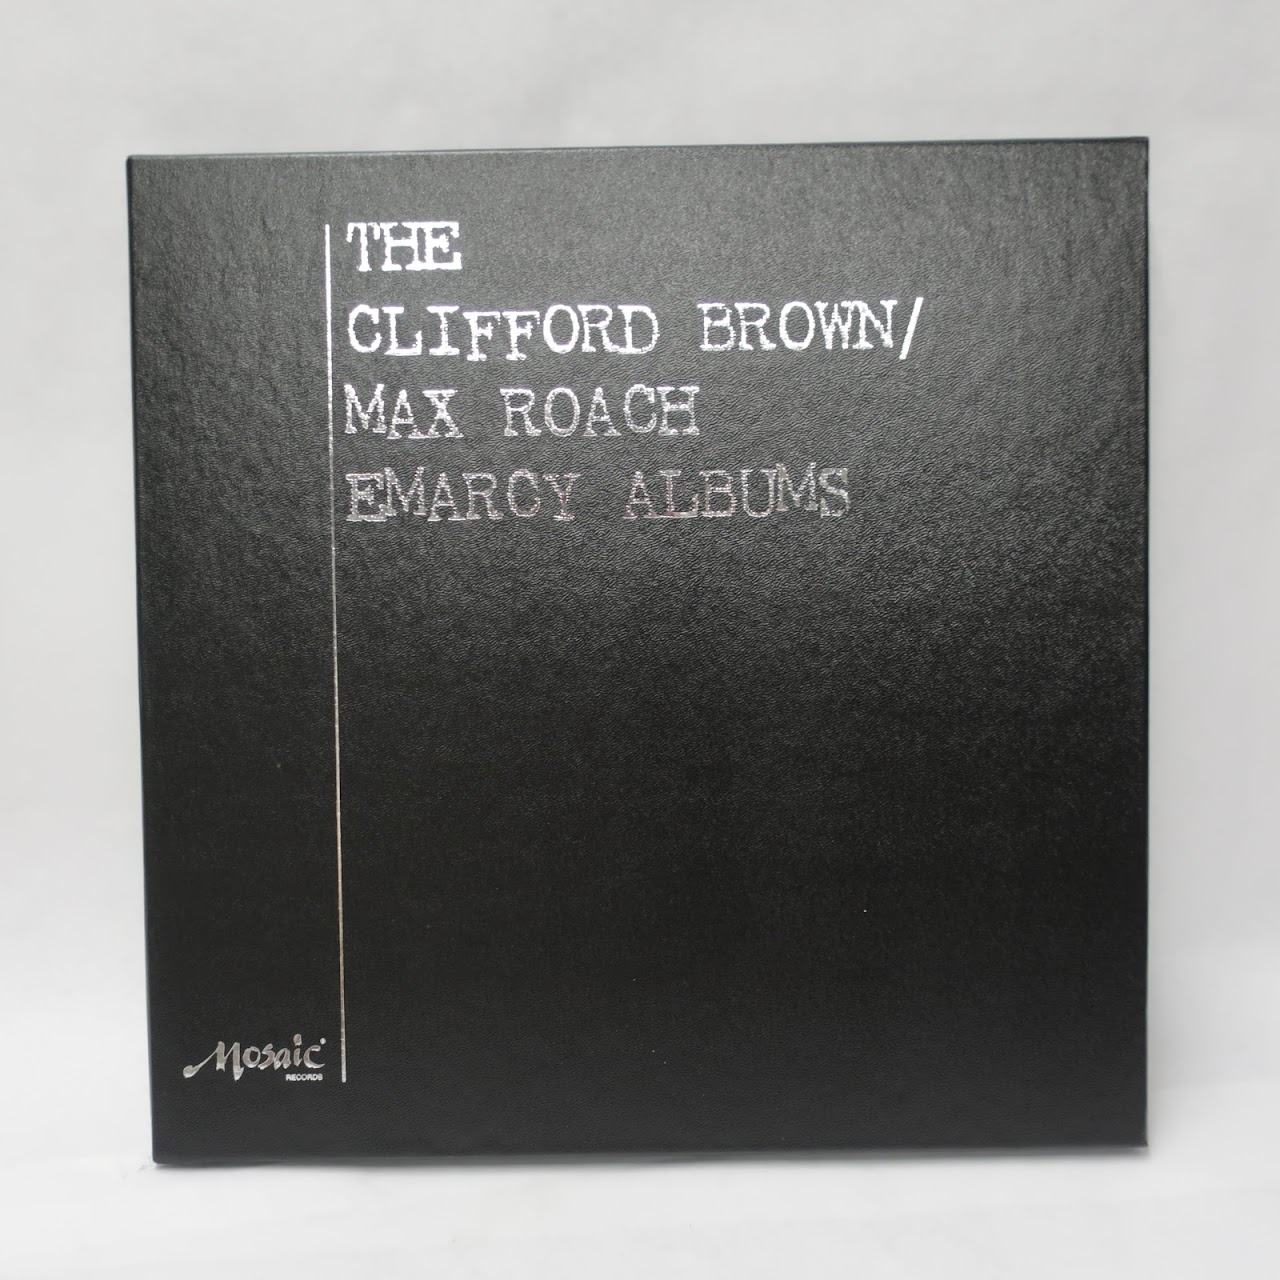 The Clifford Brown/Max Roach Emarcy Albums Limited LP Set